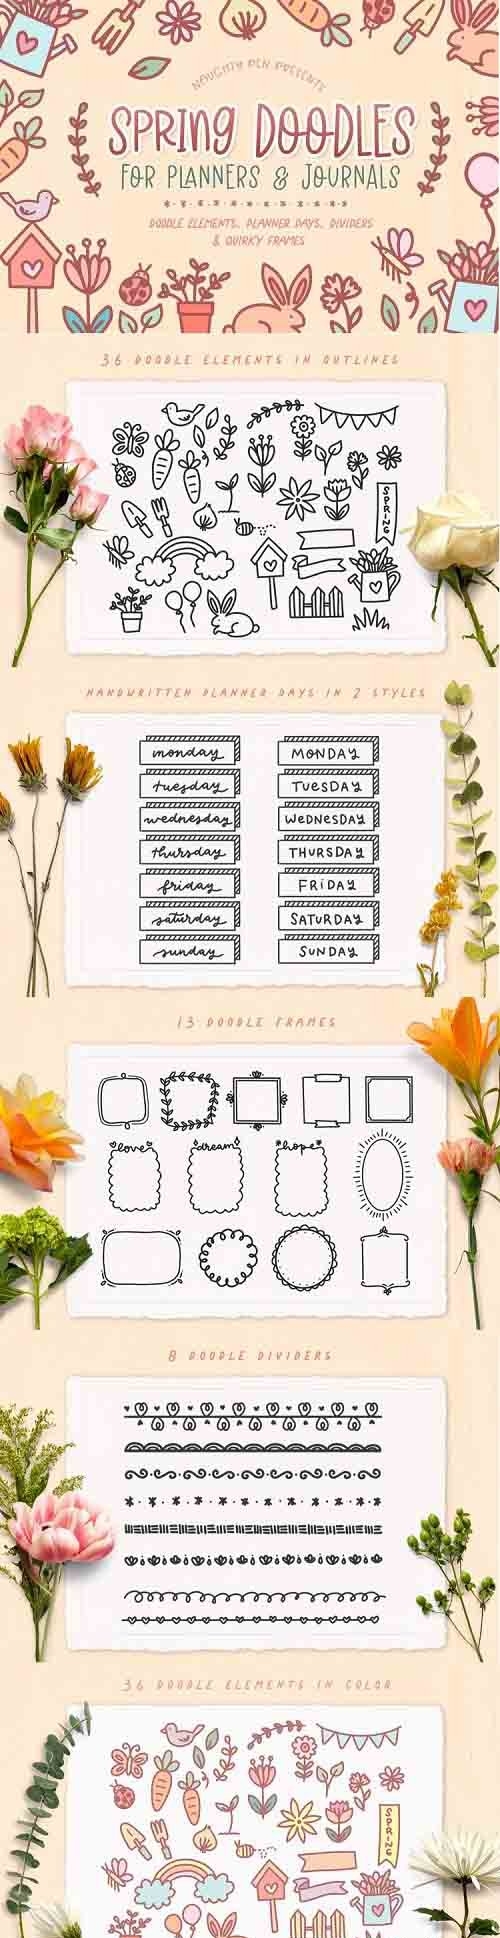 Spring Doodles For Planners And Journaling - 1239882